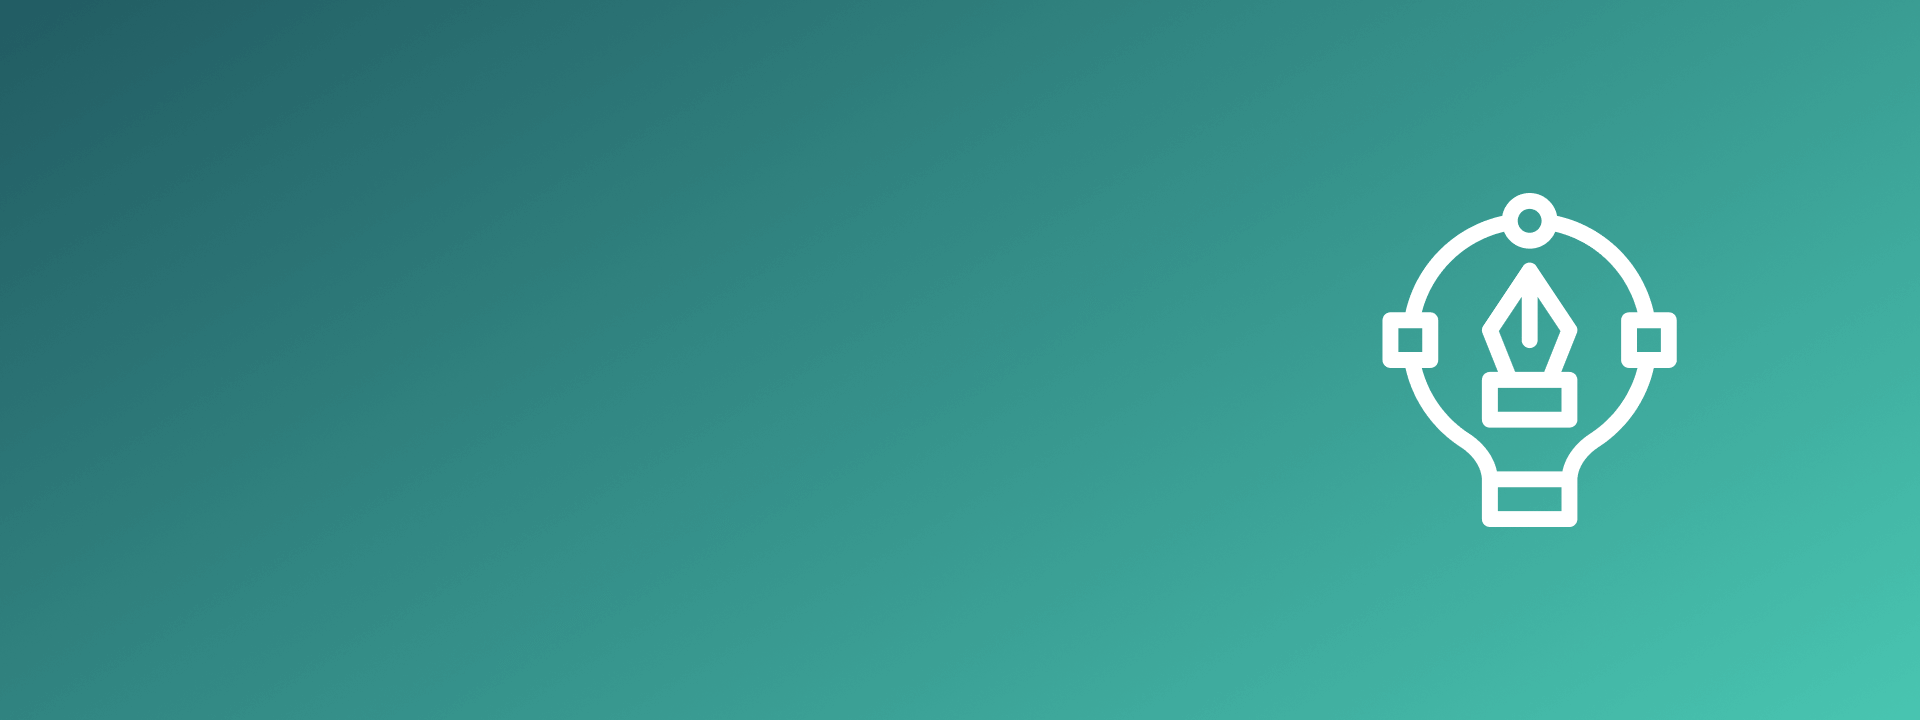 white icon of a fountain pen tip inside of a lightbulb on a green gradient background